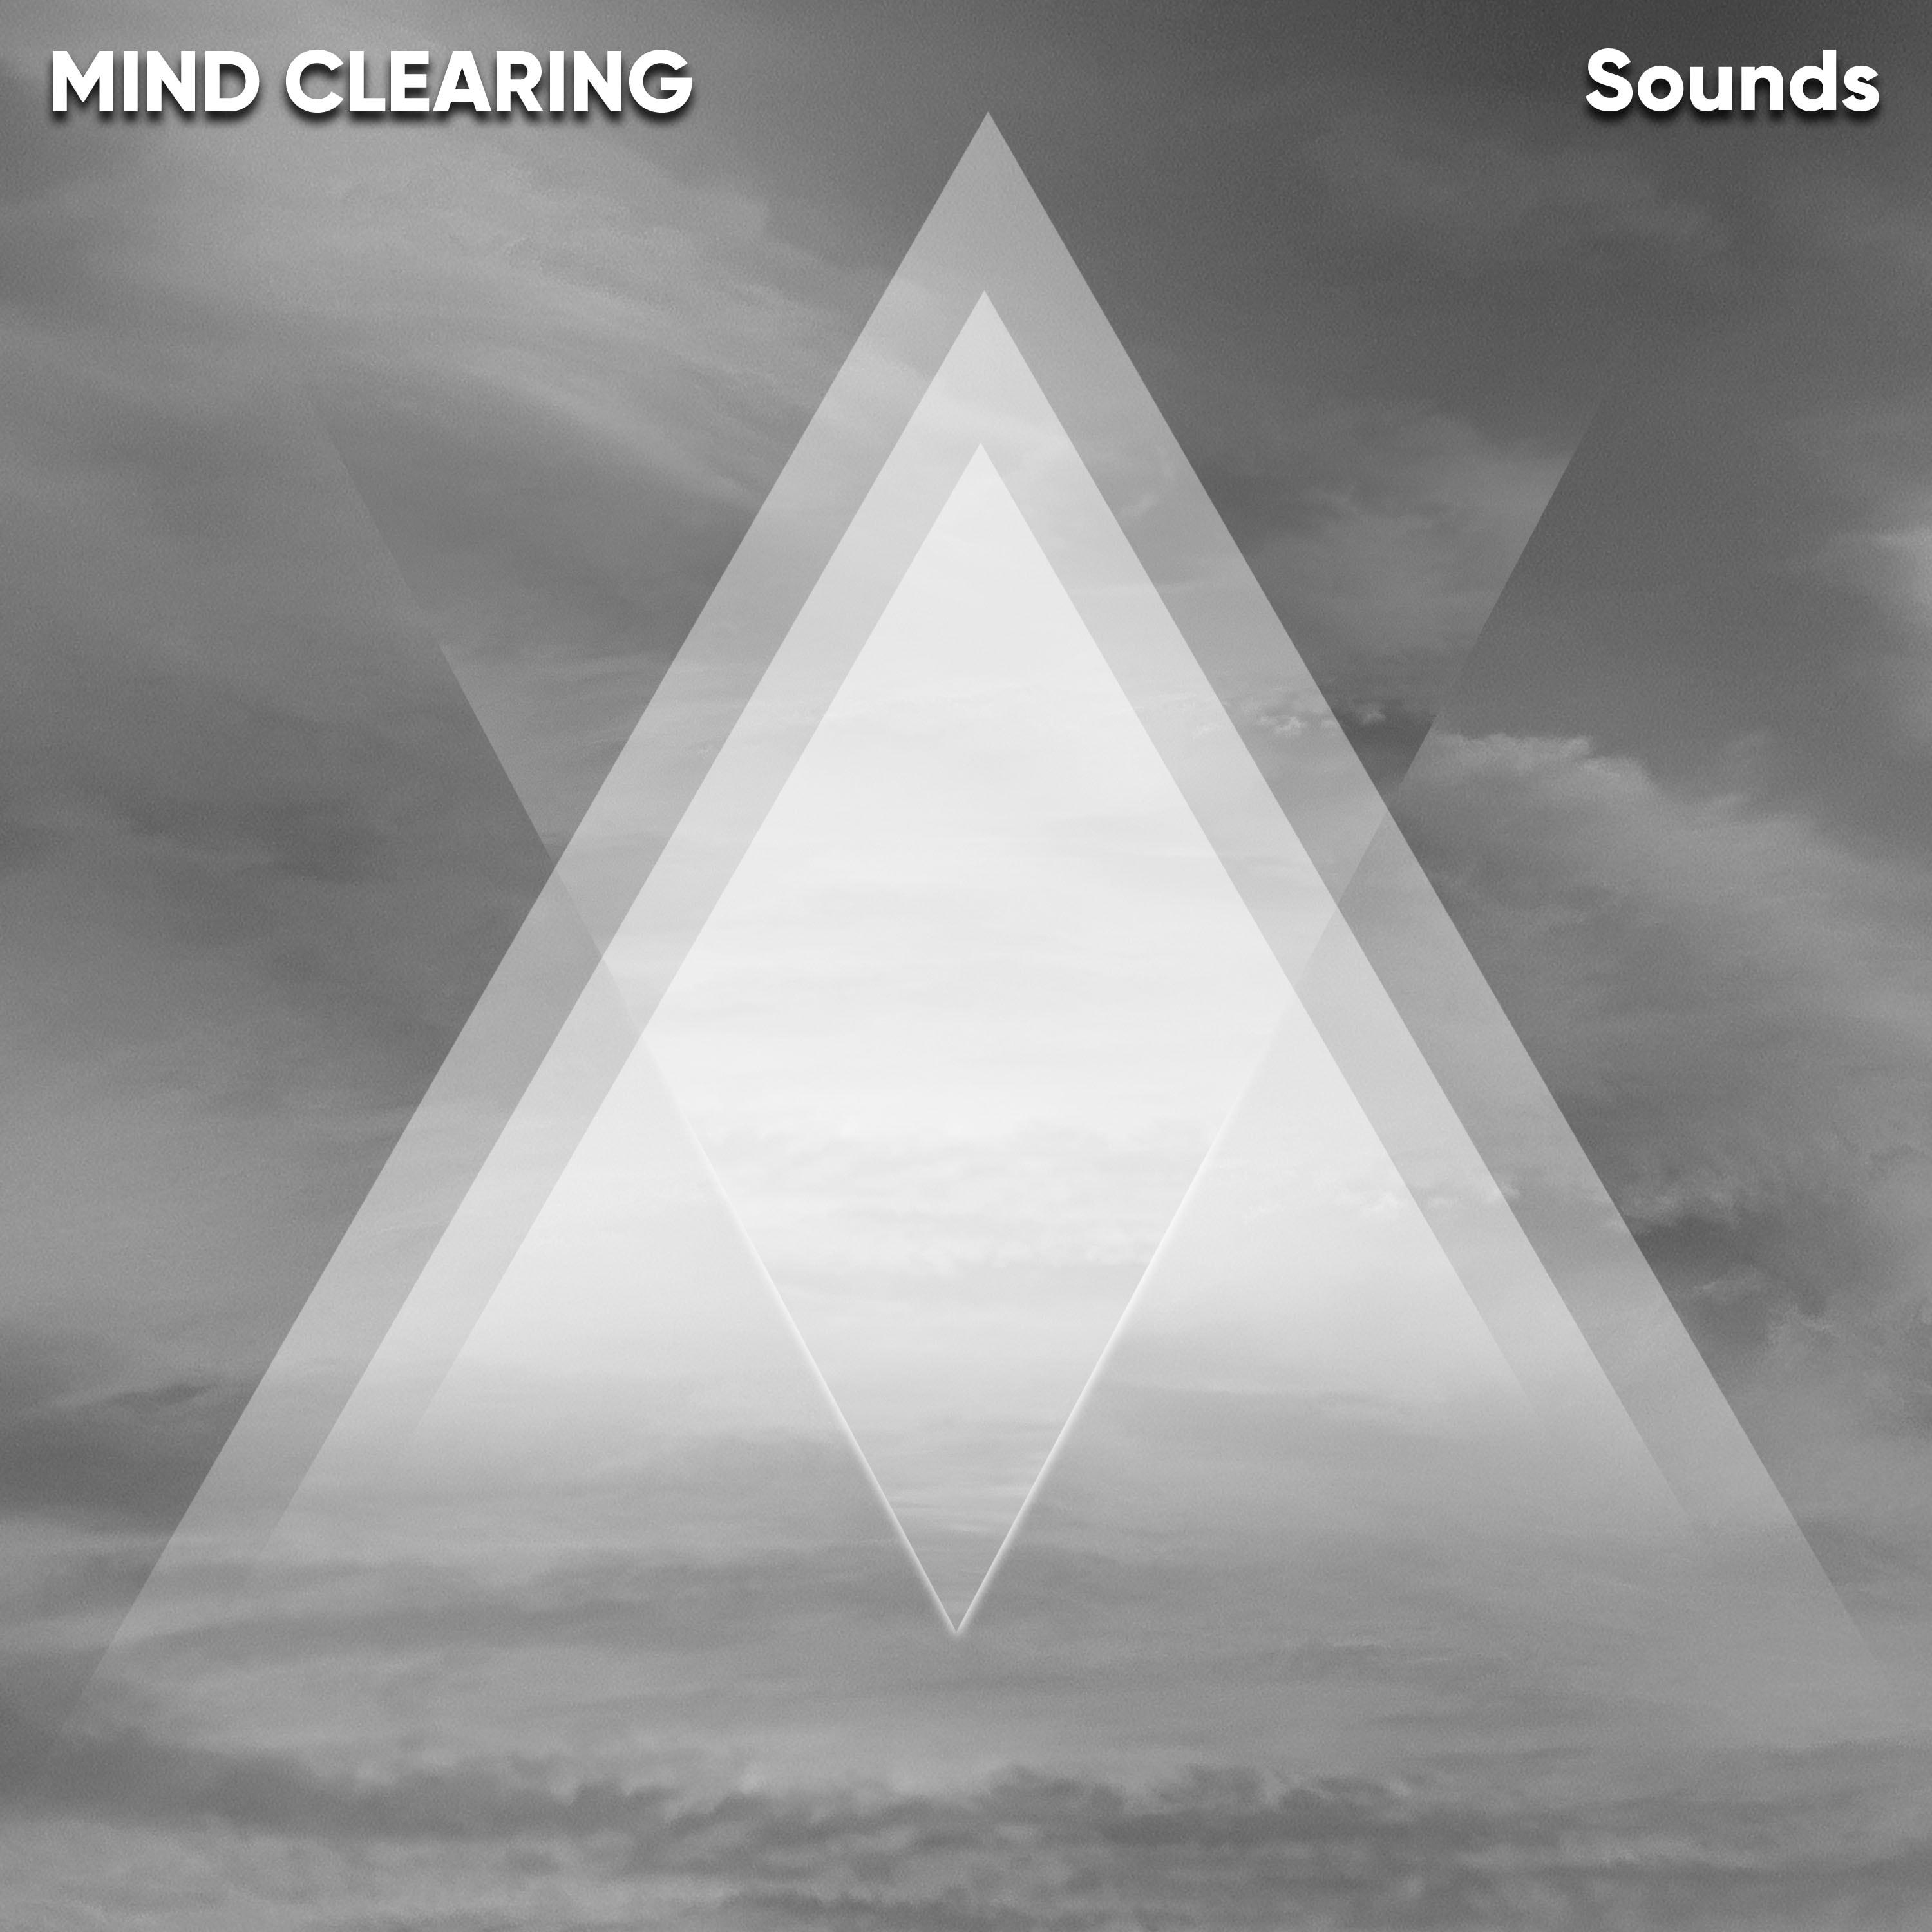 #21 Mind Clearing Sounds for Meditation and Sleep